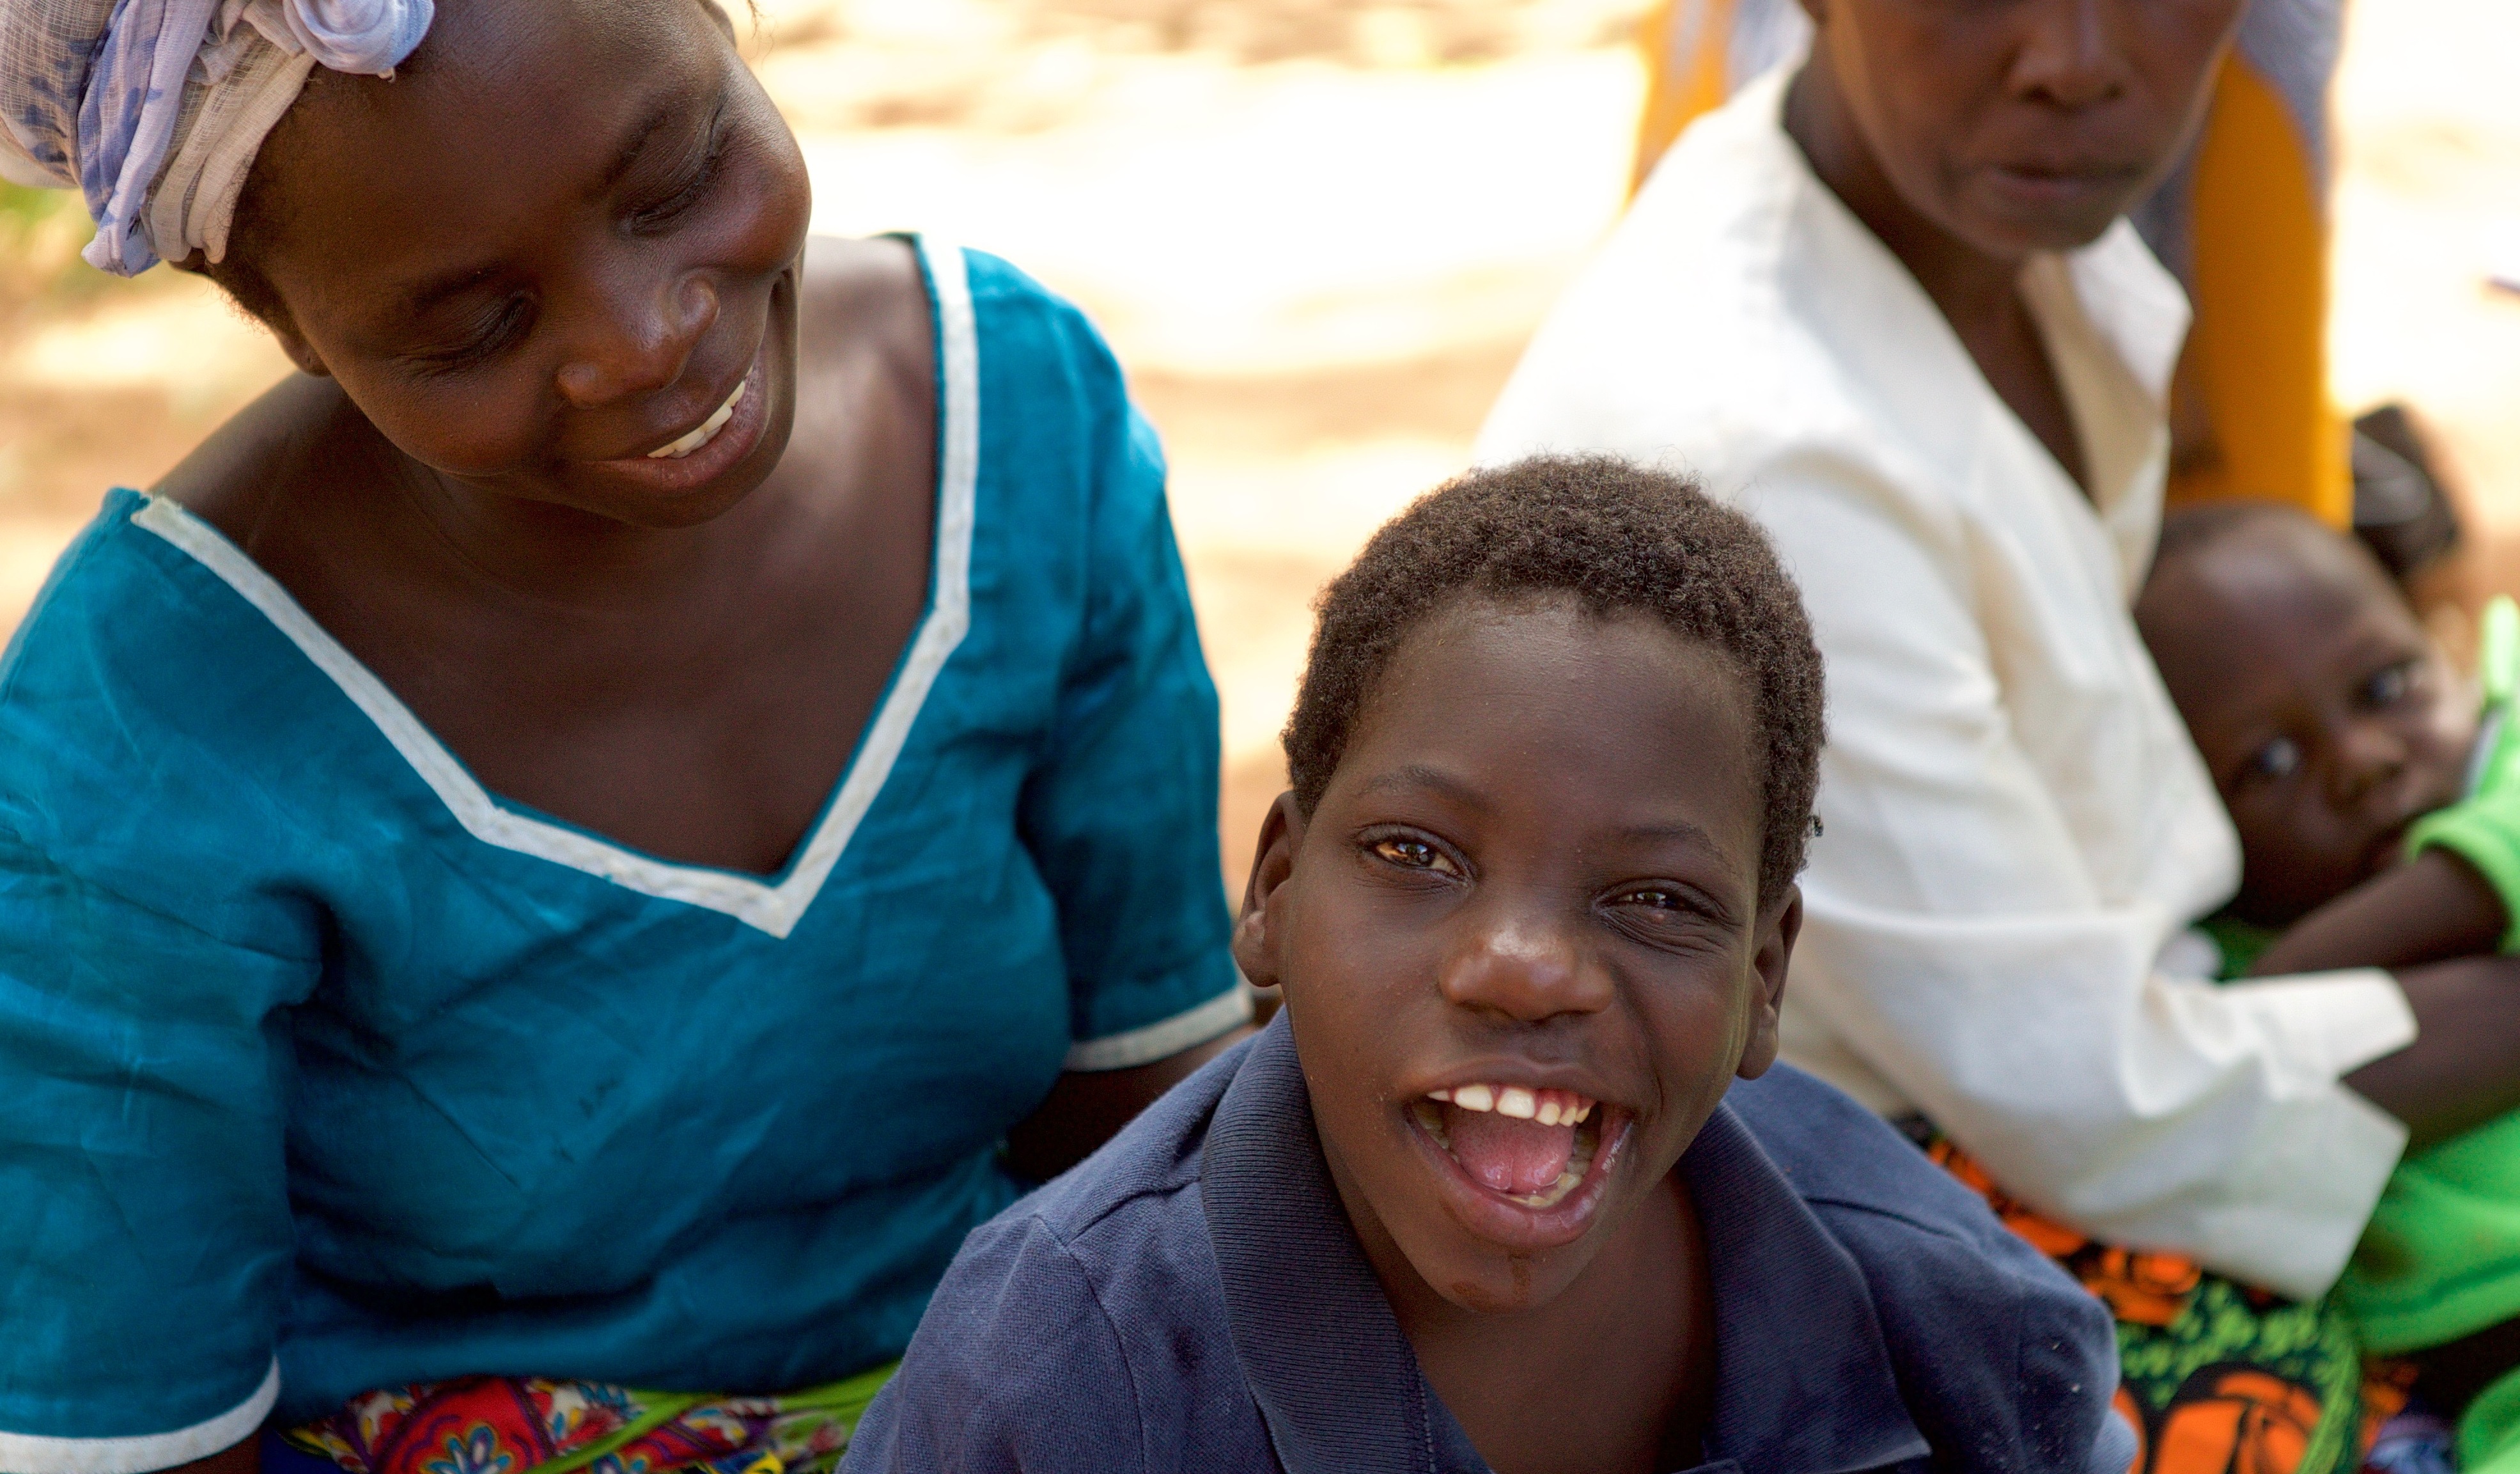 A Zambia woman sits behind her son, looking at him. He looks at the camera, smiling.